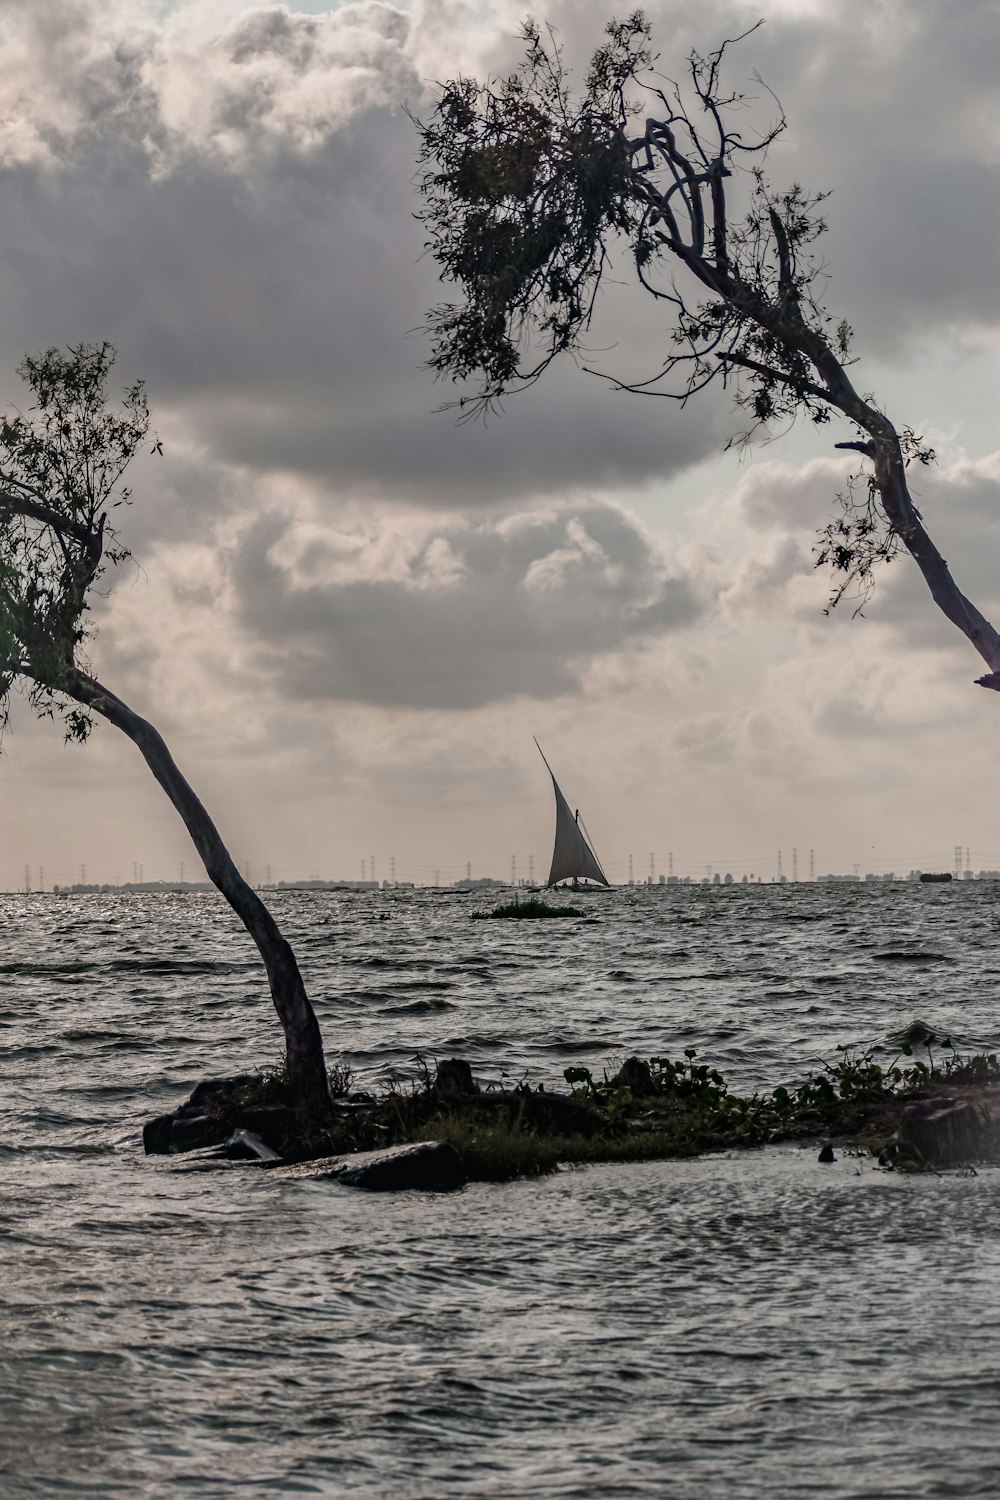 a sailboat is in the water near a tree